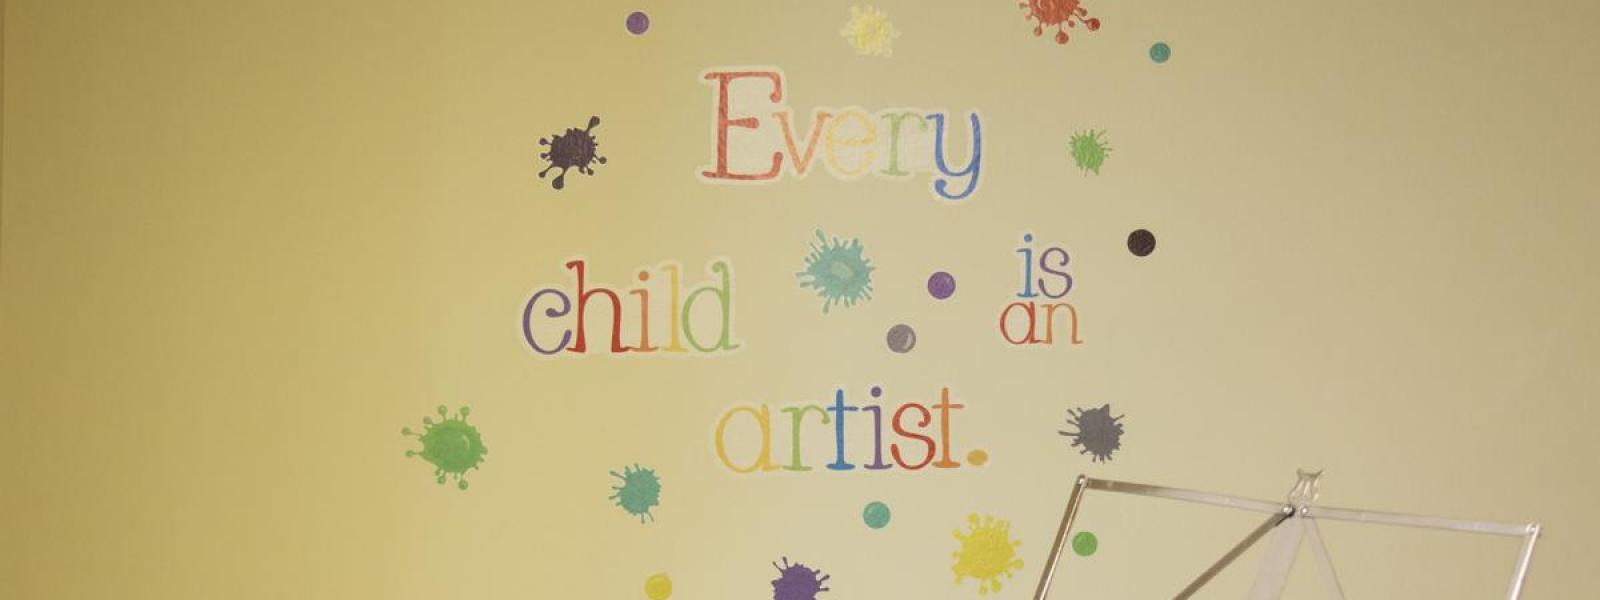 Every Child is an Artist